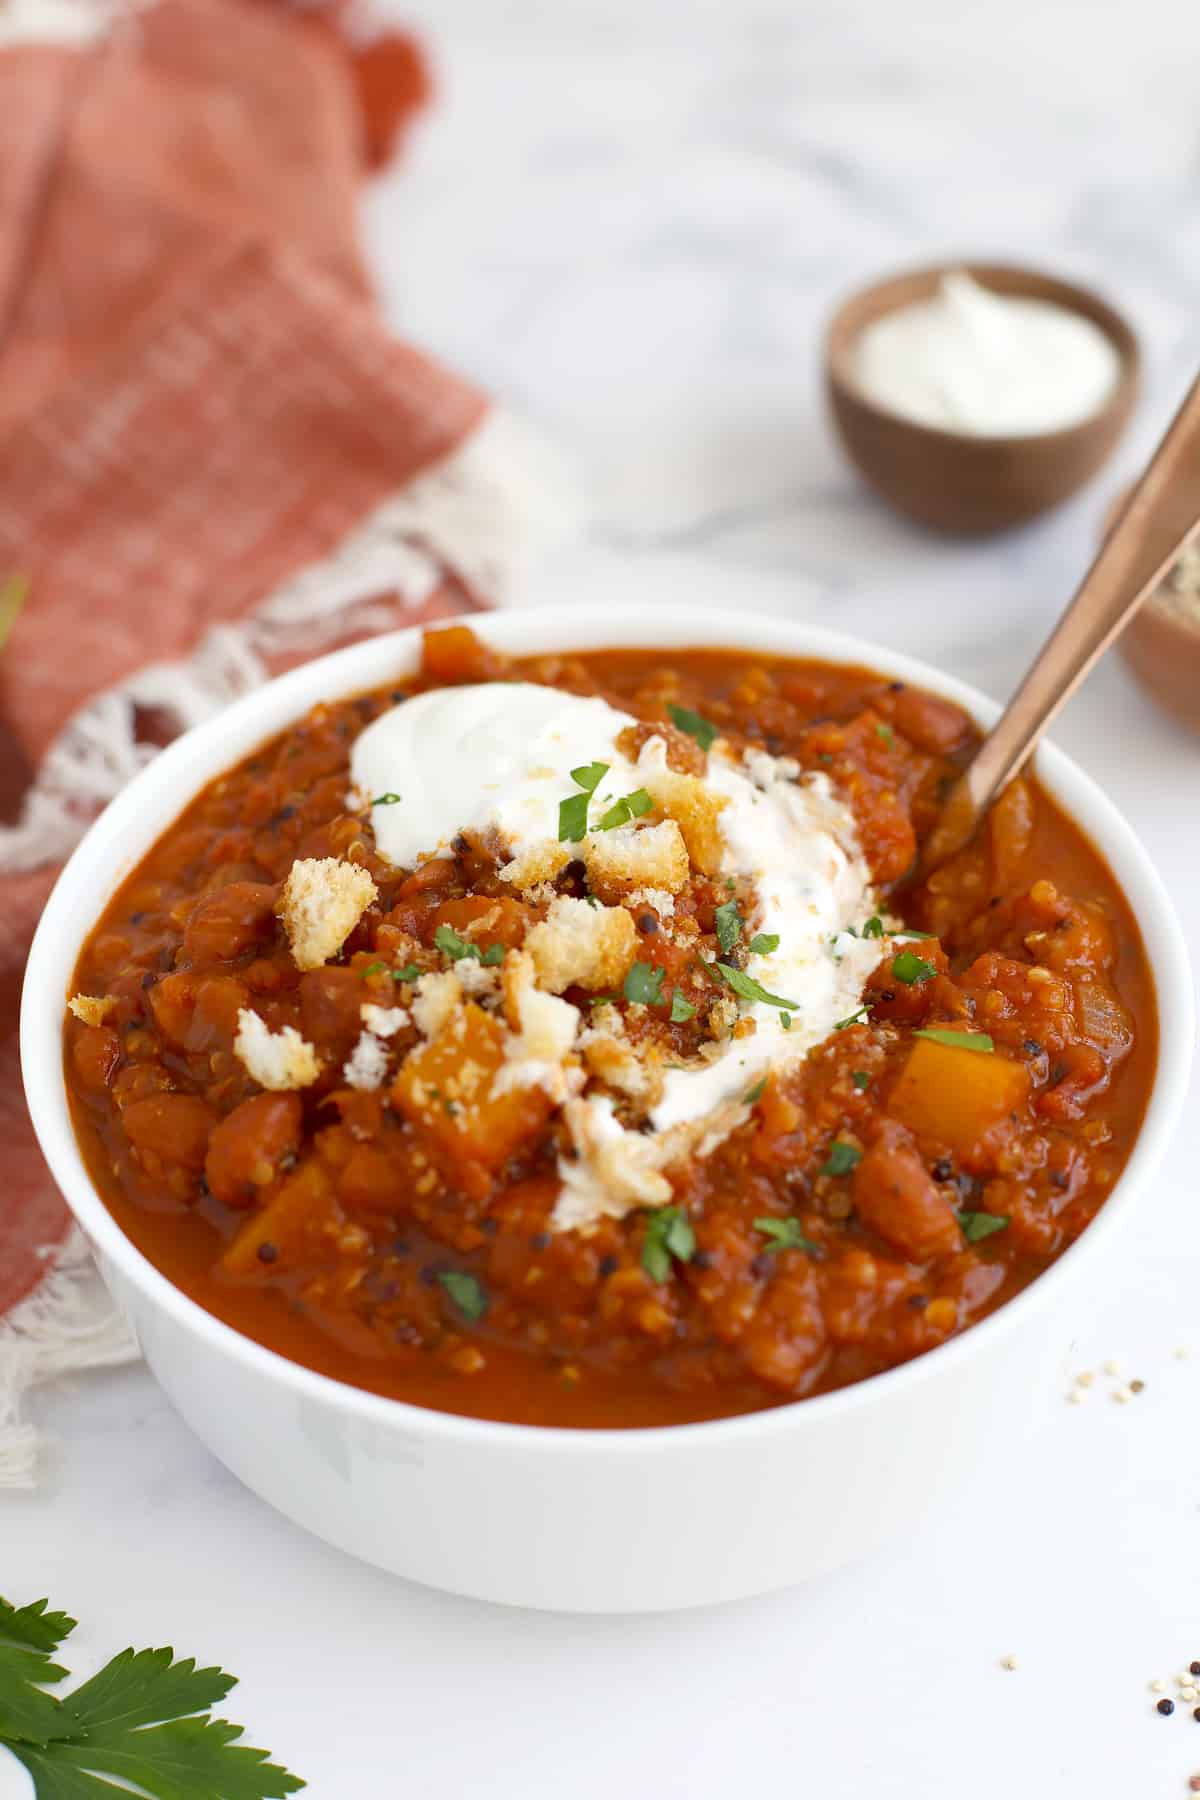 A serving of pumpkin chili in a white bowl with a spoon, topped with fresh parsley and a swirl of sour cream.